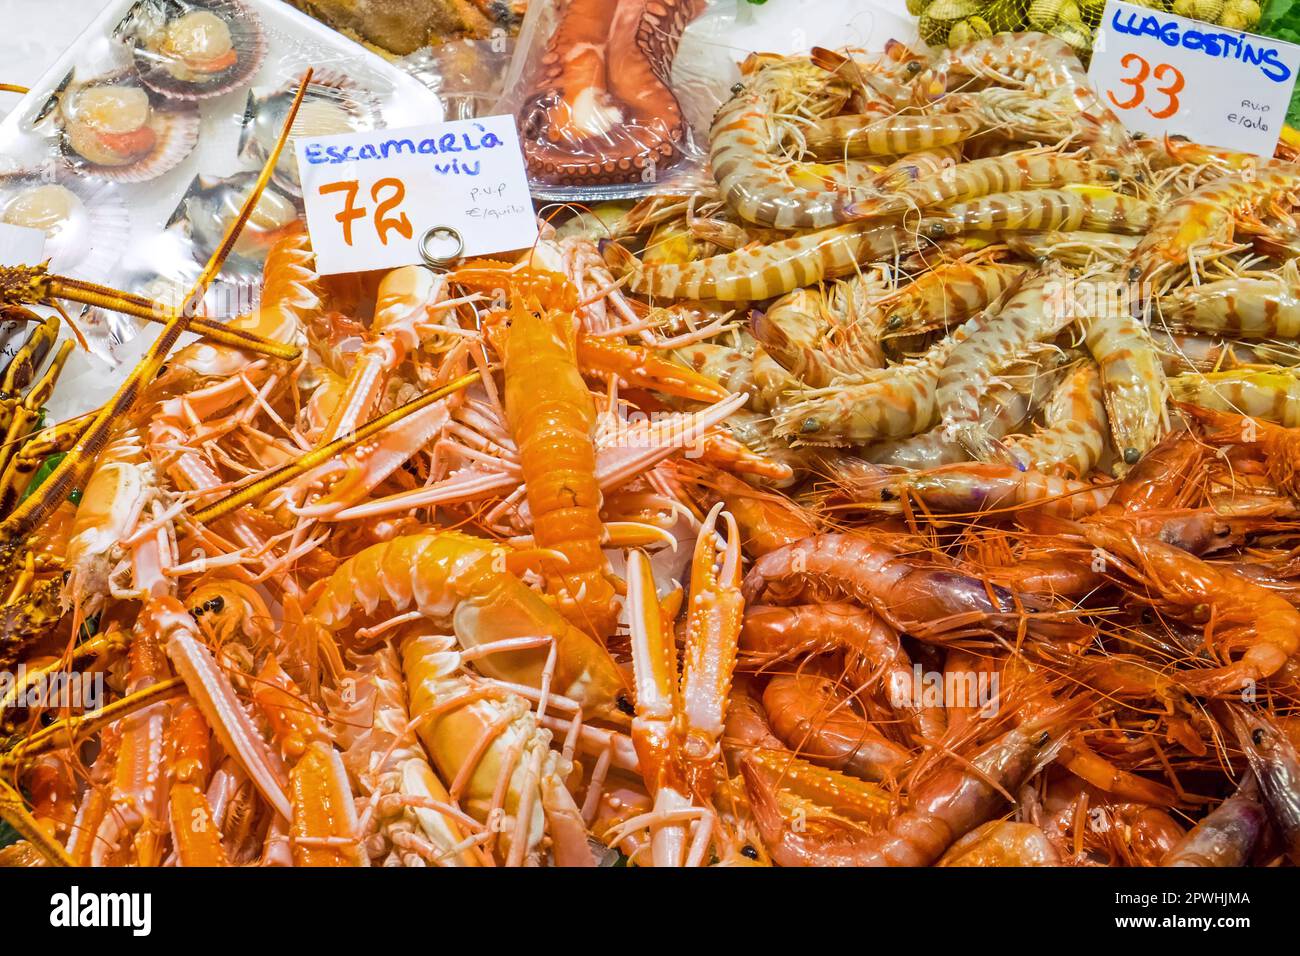 Fresh shellfish for sale at a market Stock Photo